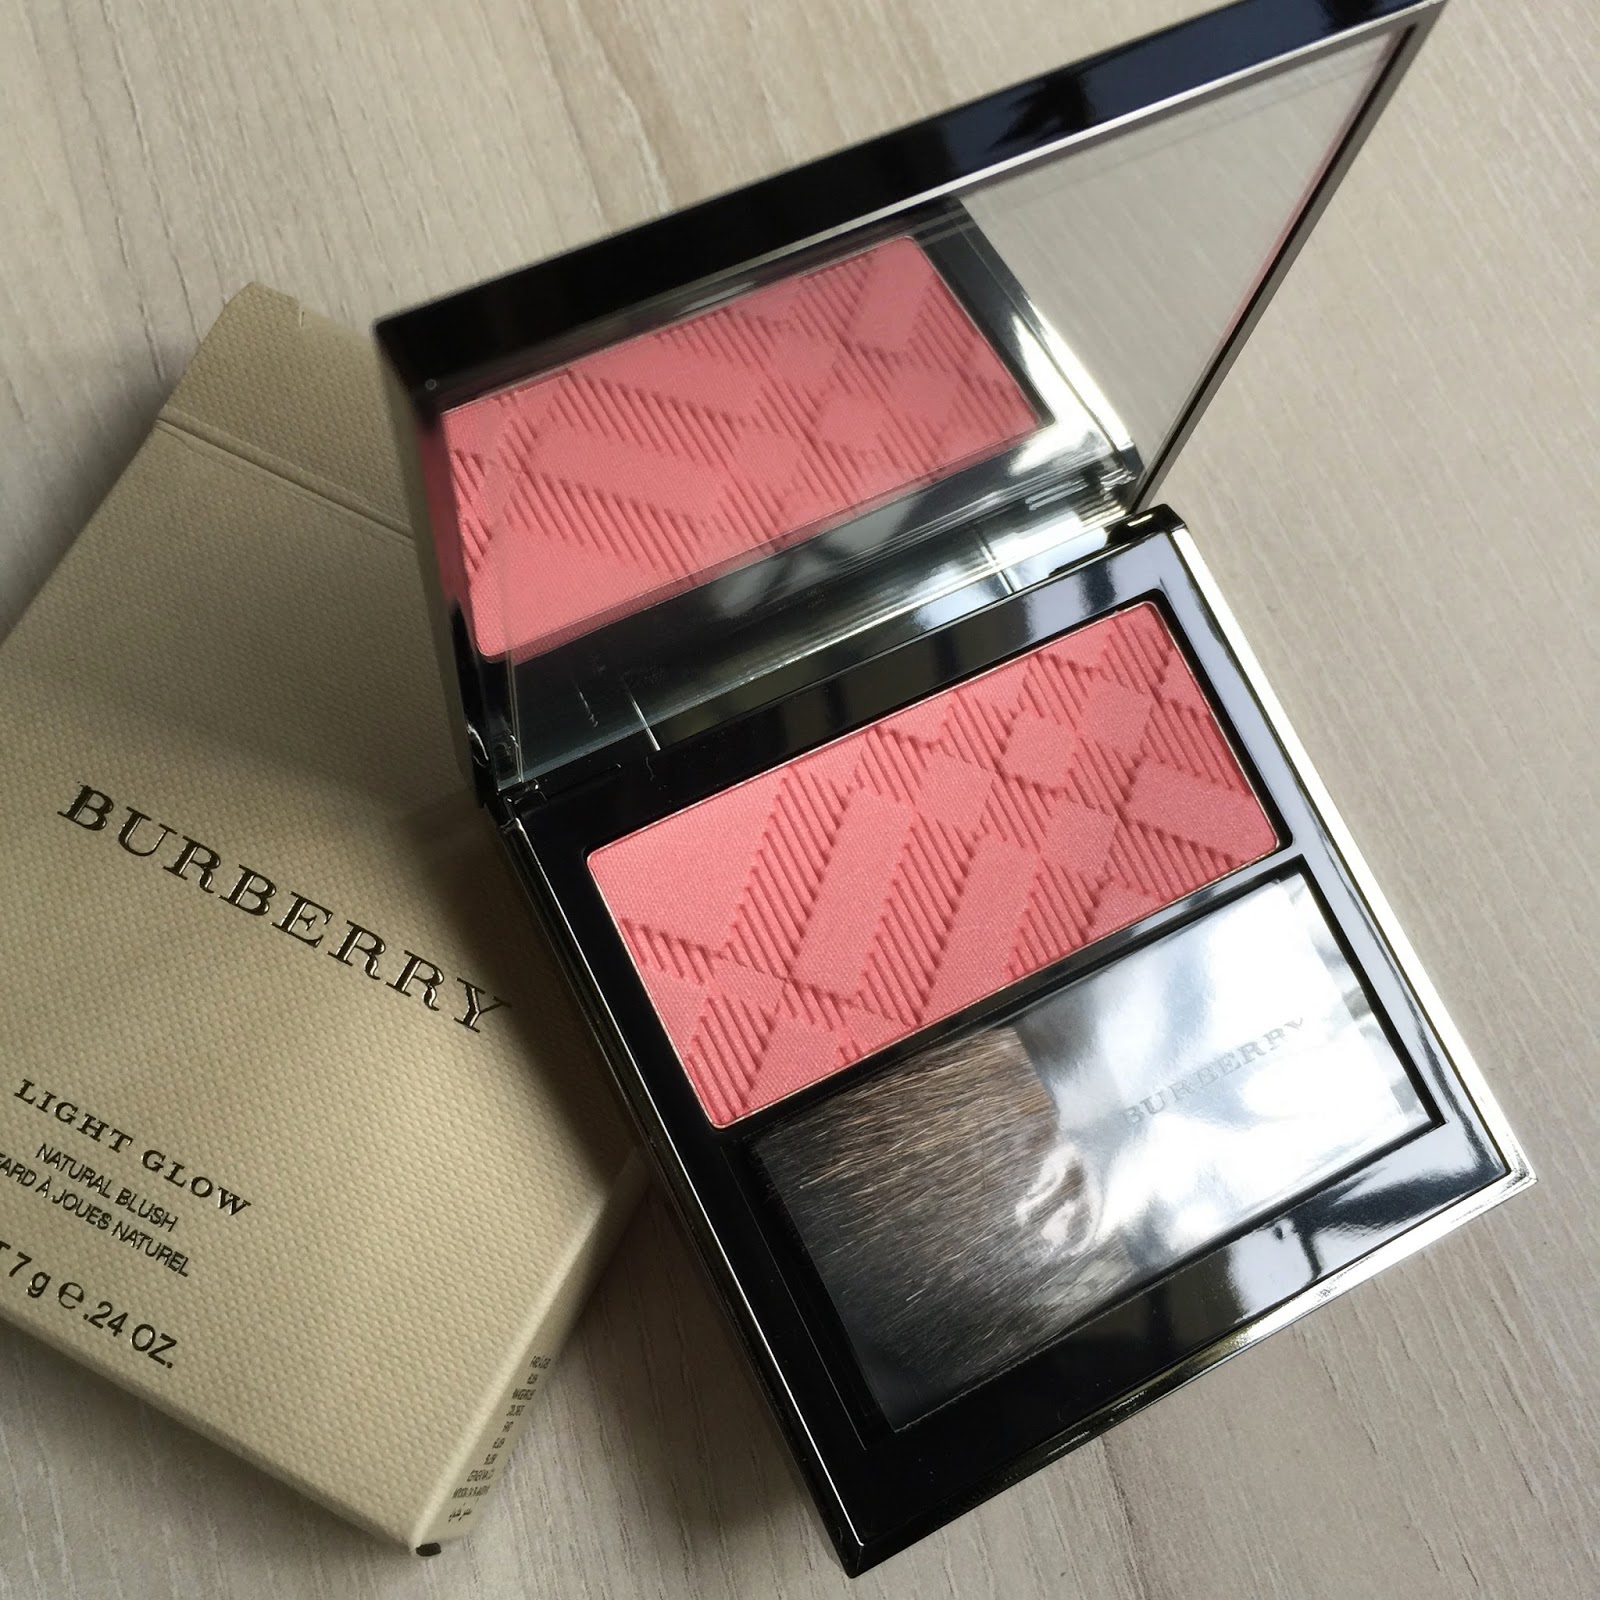 Miaka's Life and Loves: Burberry Light Glow Blush in Blossom